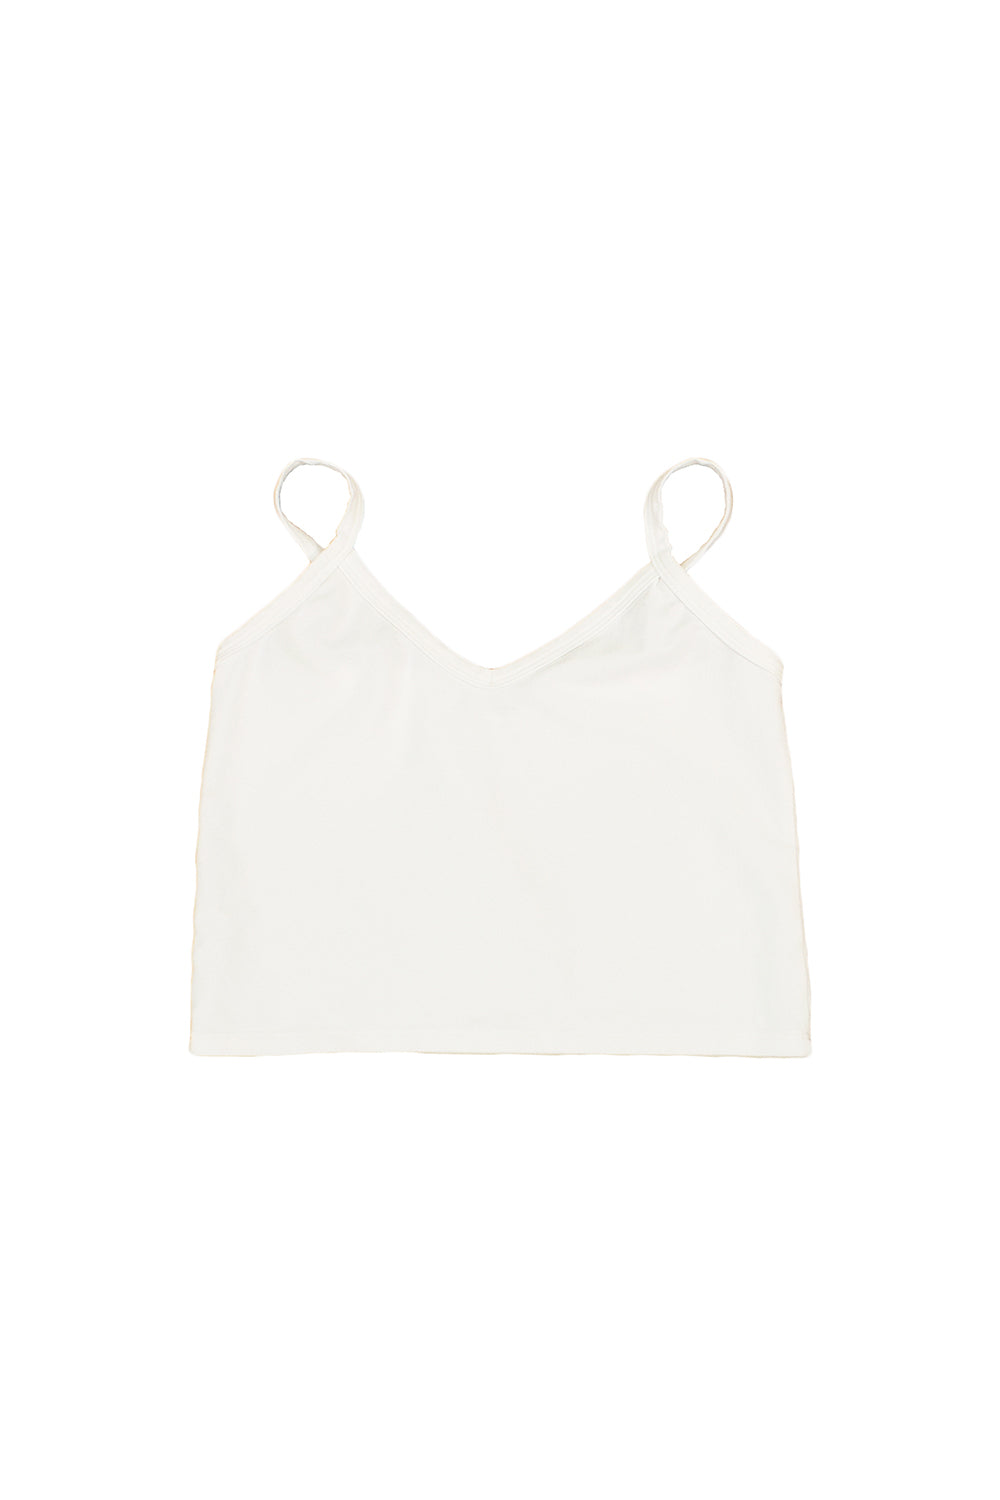 Spaghetti Tank | Jungmaven Hemp Clothing & Accessories / Color: Washed White